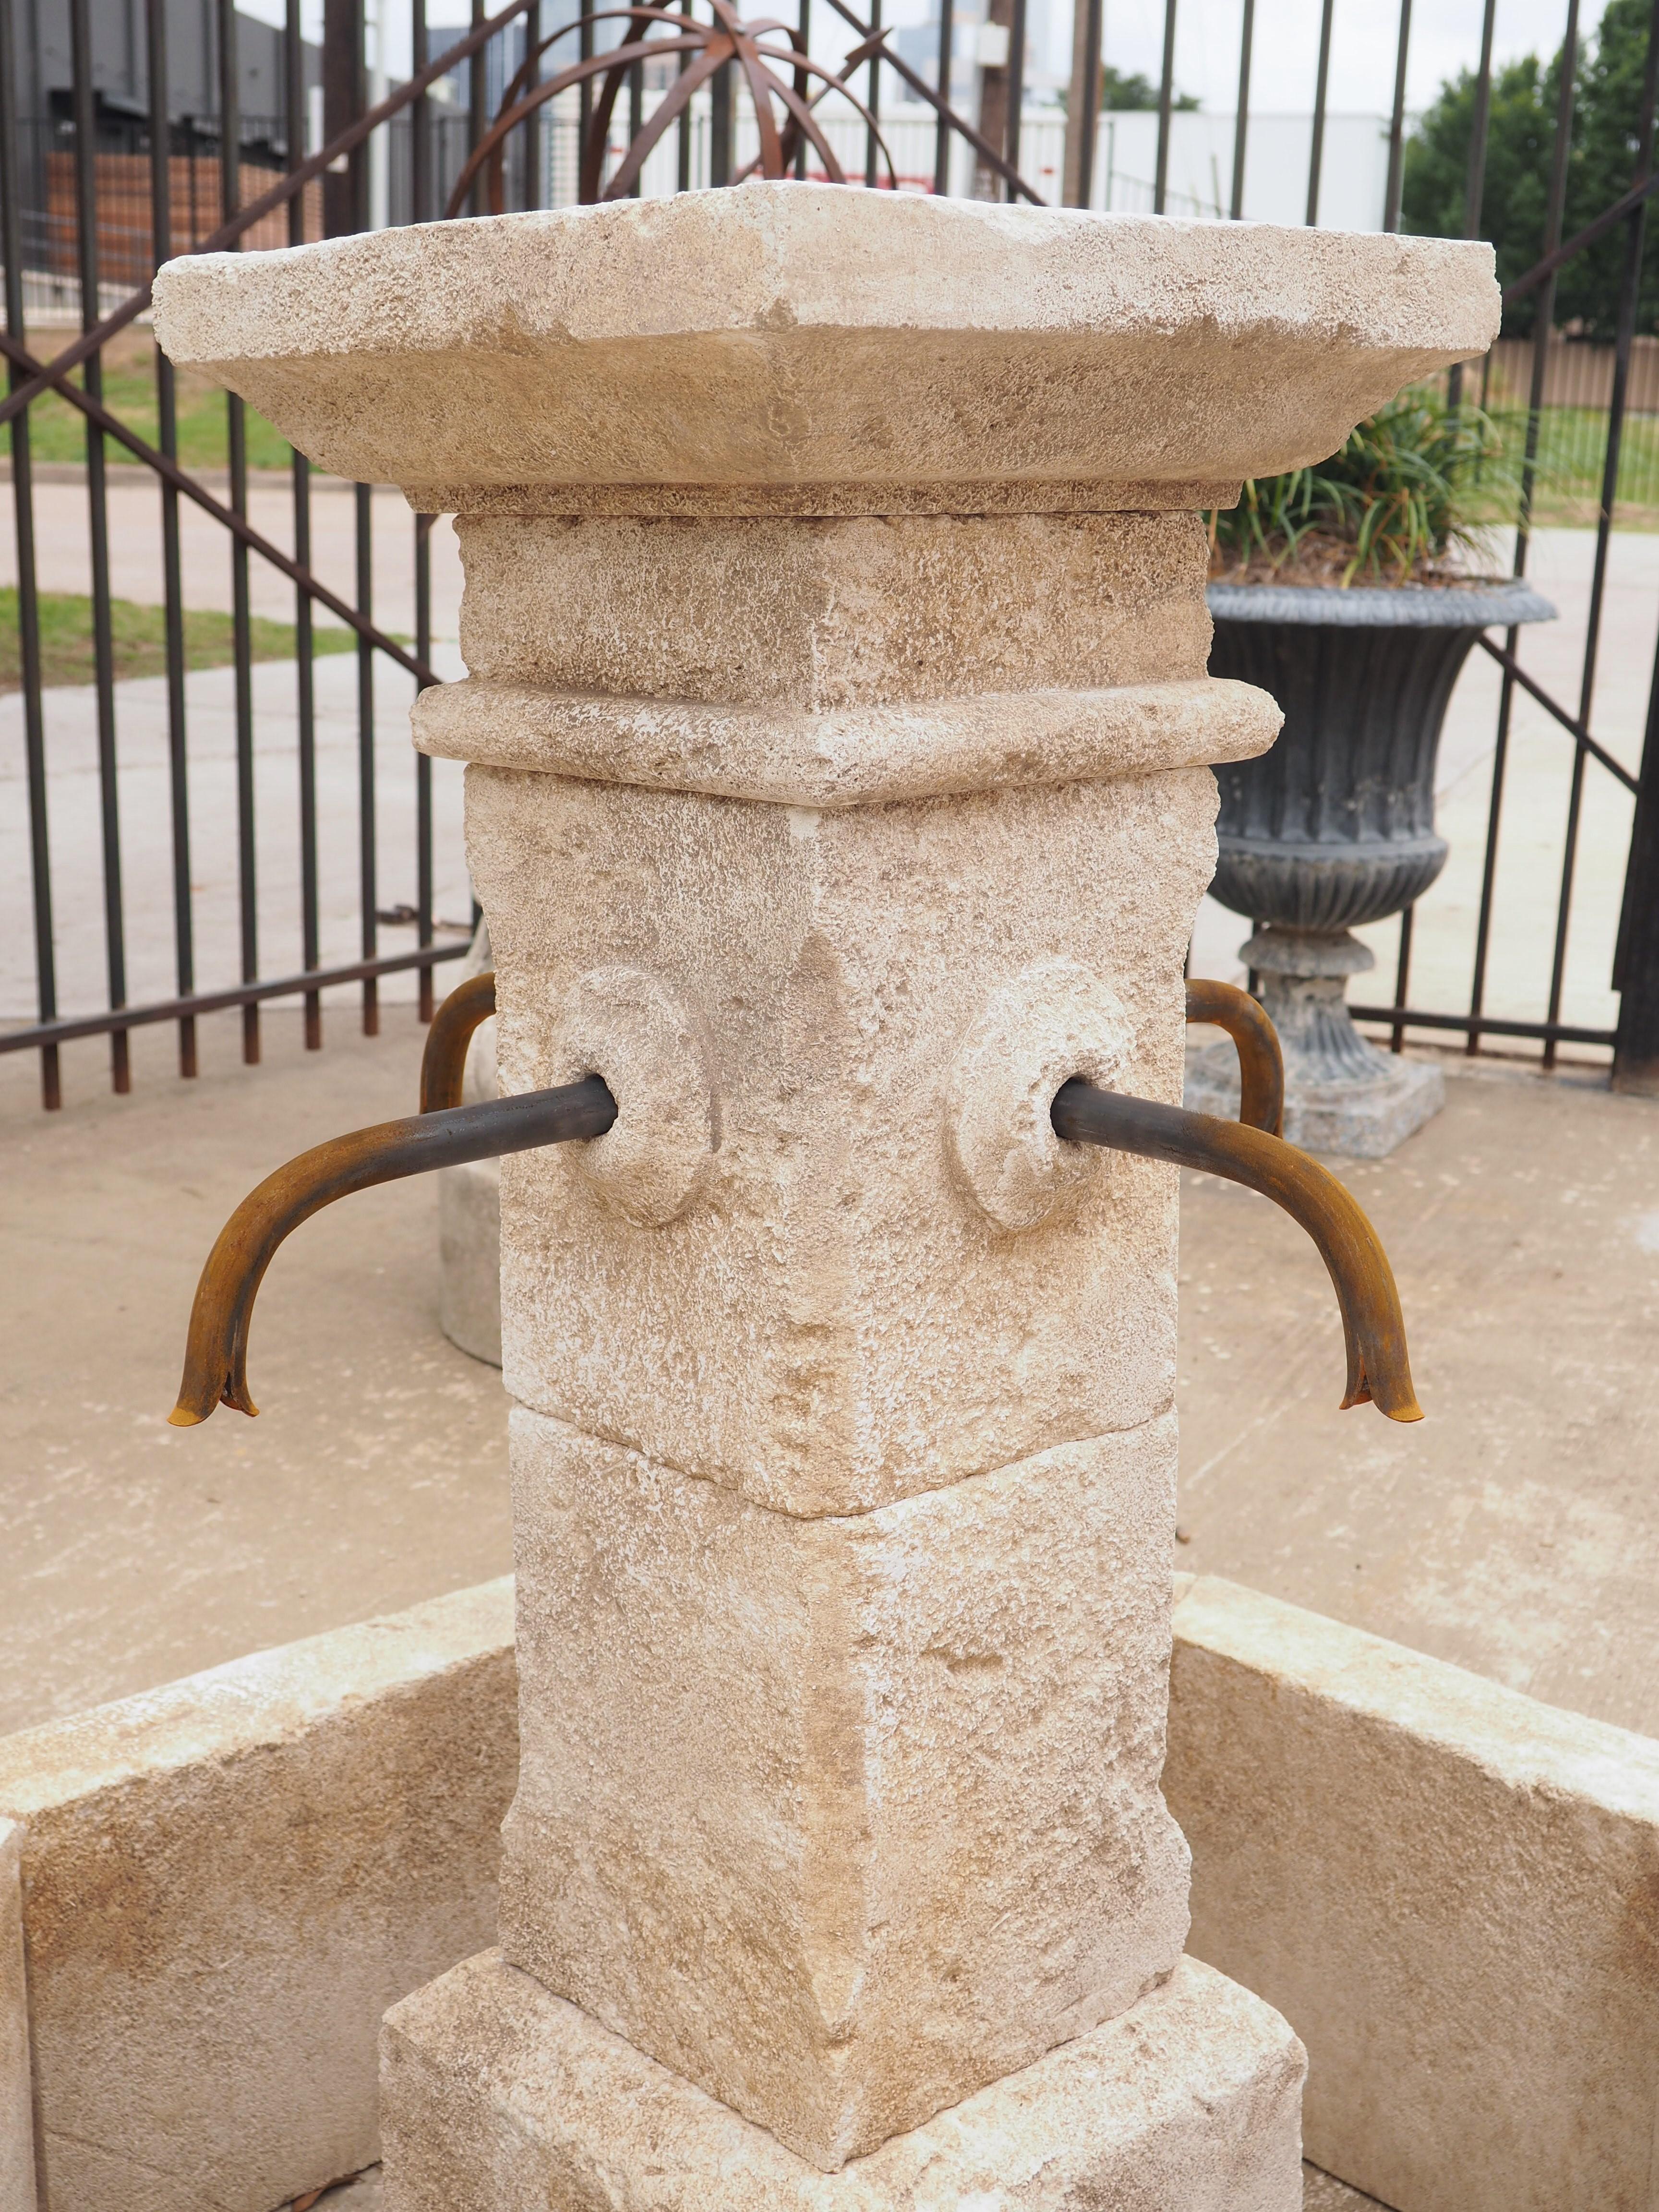 Hand-Carved Small Octagonal Center Fountain from Provence, France